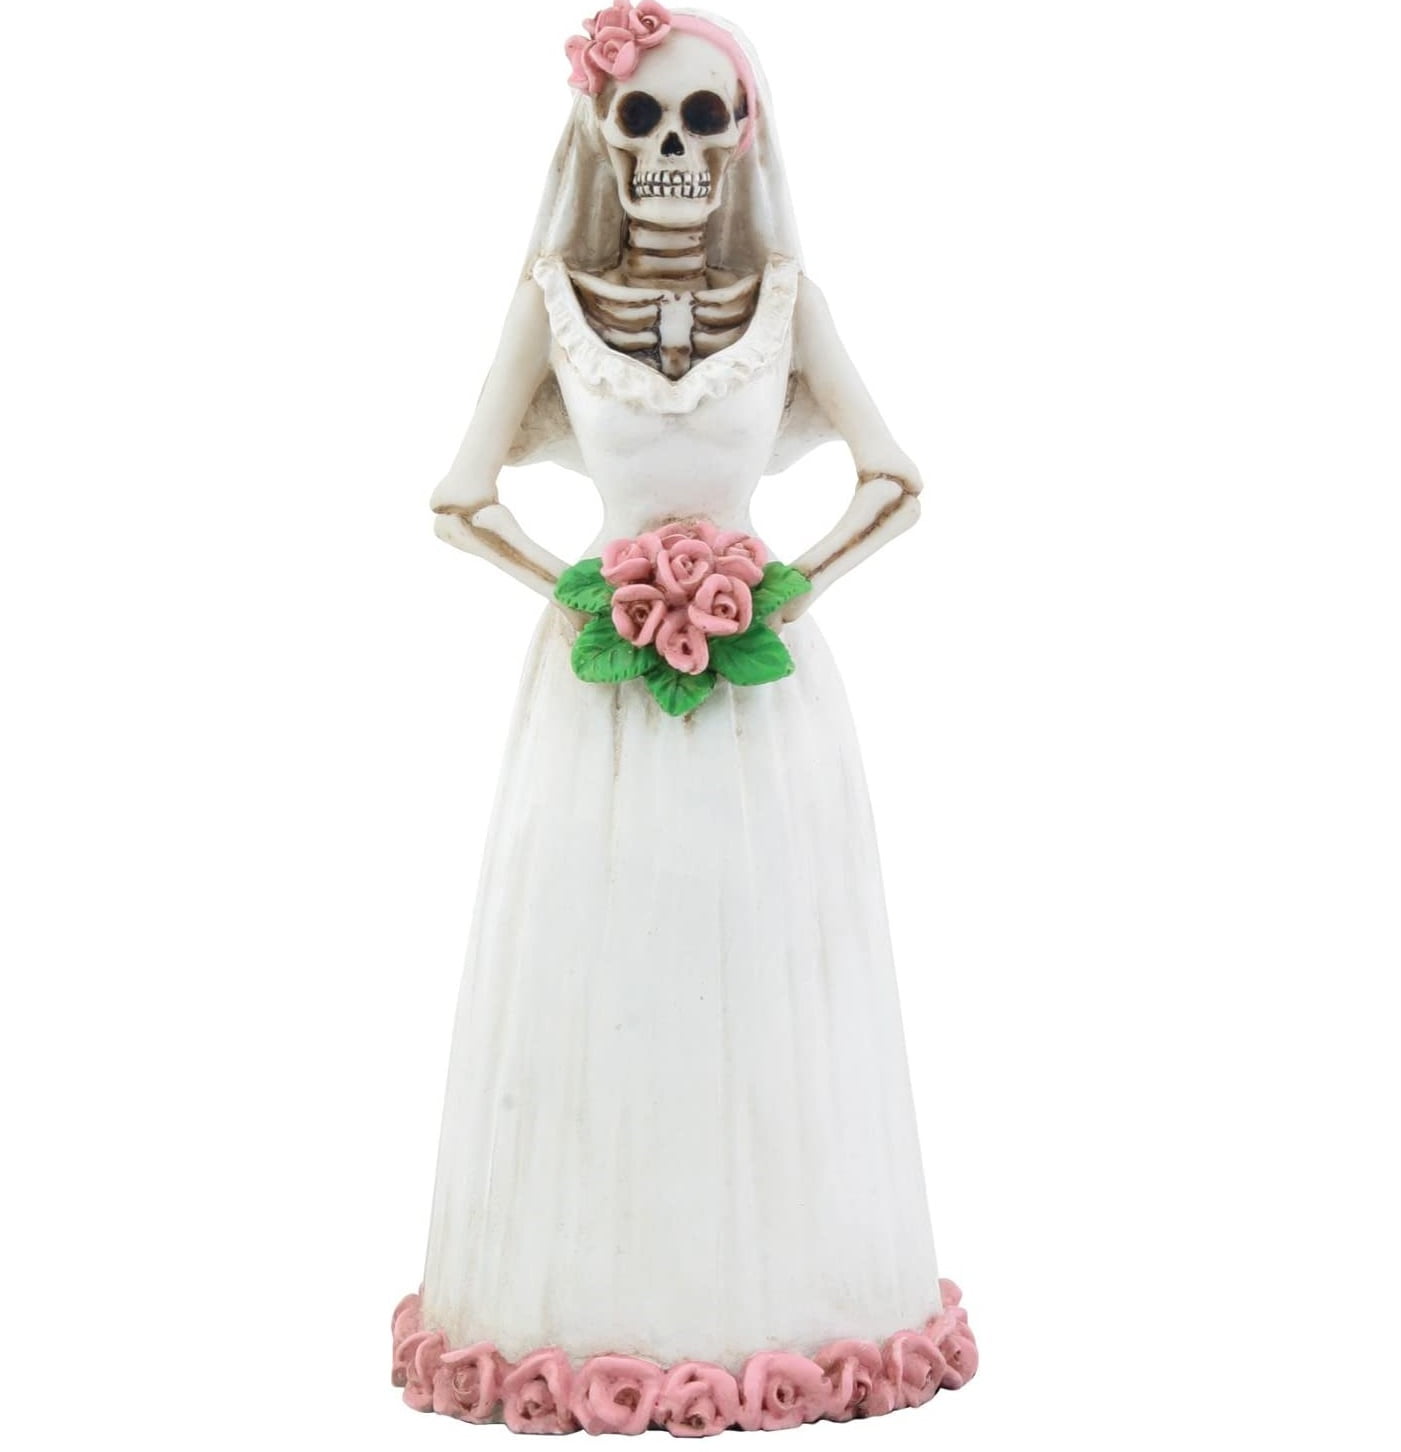 Day of The Dead Gothic Bride Figurine 8" Height Skeleton by Summit Statue